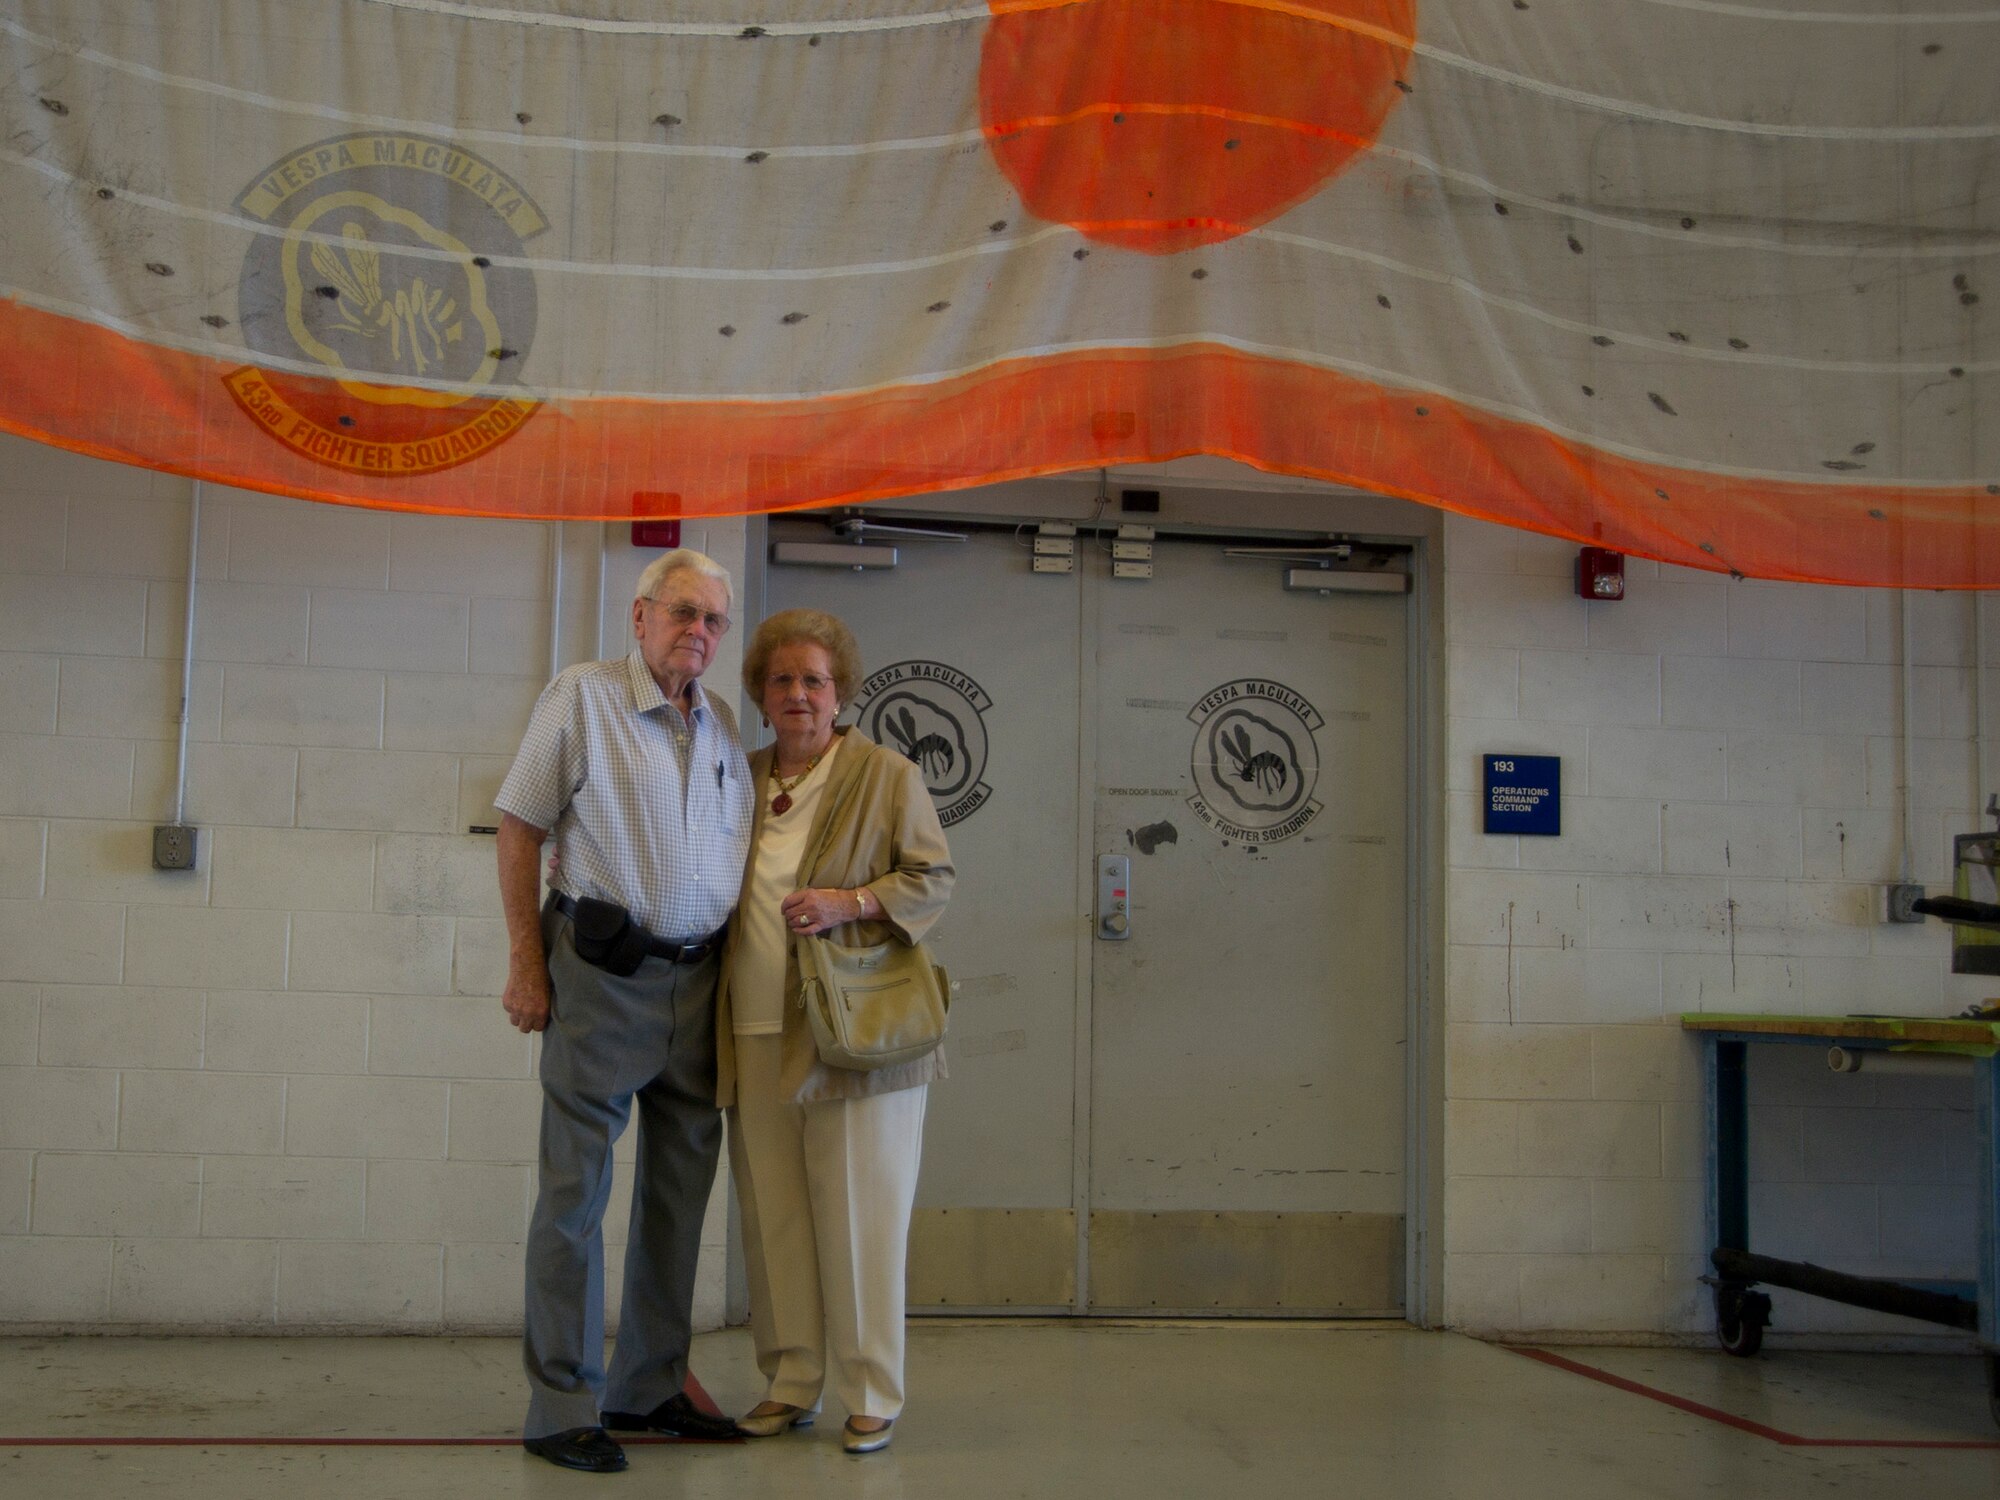 Ed and Mary Butzke stand for a picture in front of a tow banner Aug 25. The Butzkes toured Tyndall after being gone for more than 70 years. (U.S. Air Force photo by Airman 1st Class Dustin Mullen)